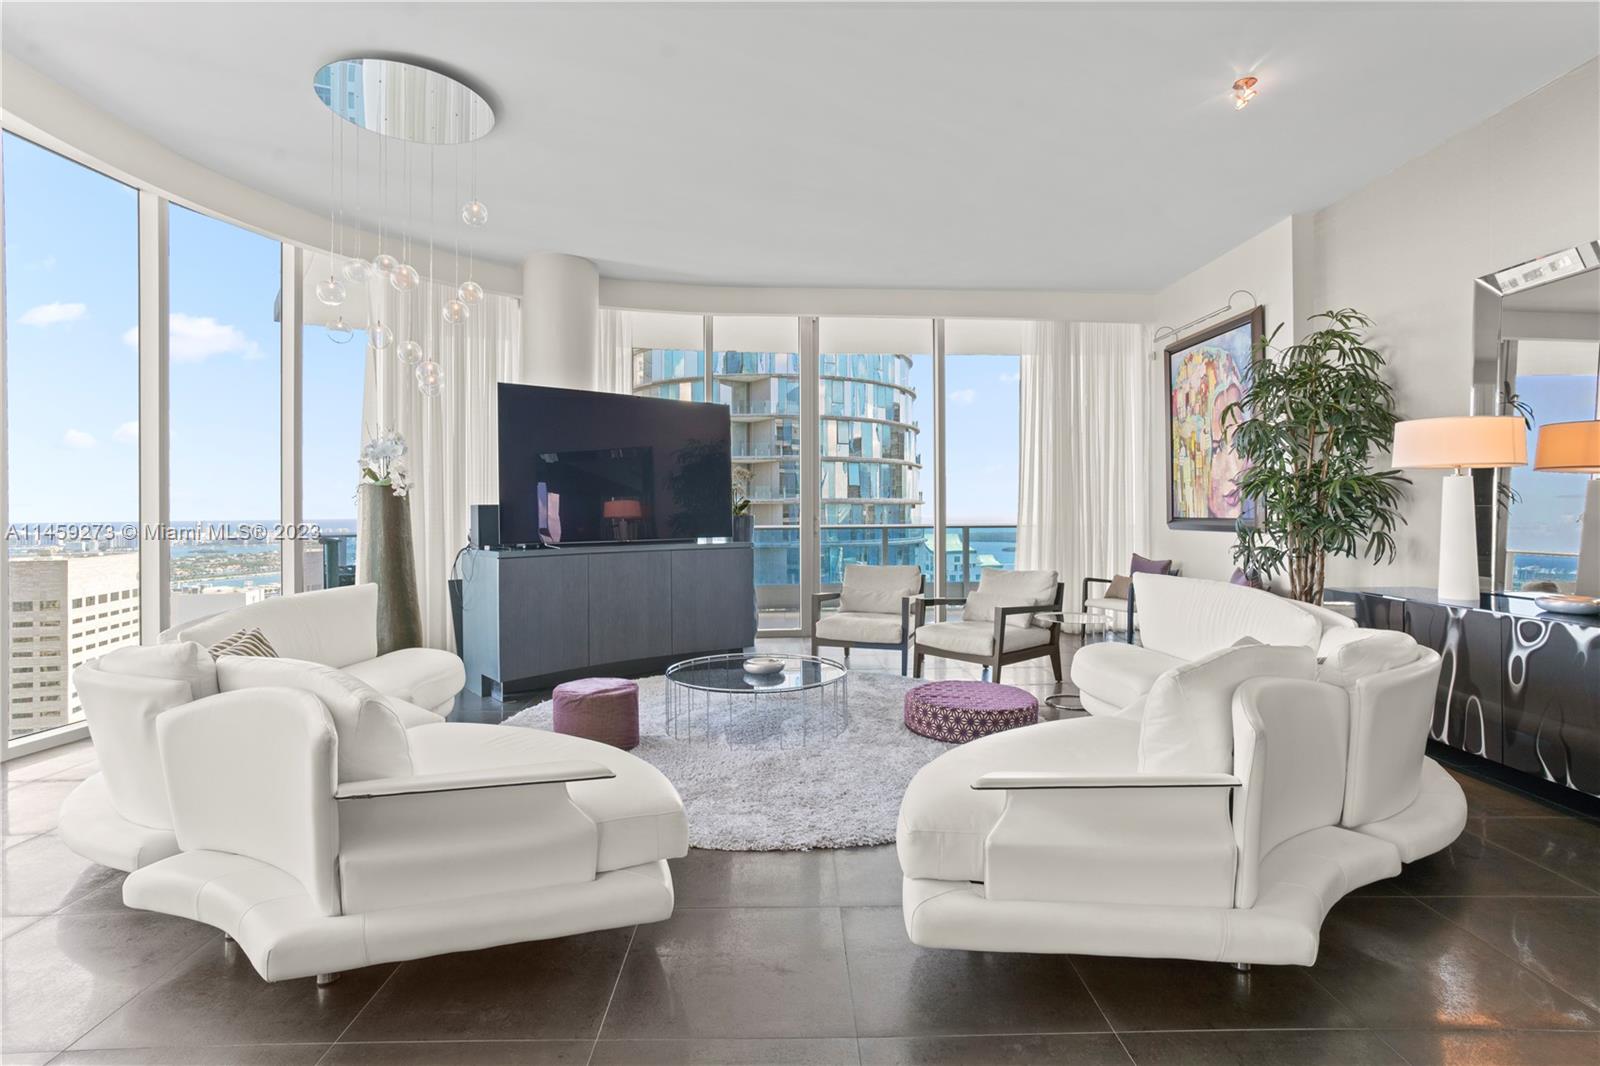 Epic Residences presents an exquisite living experience with its spacious 3 bedrooms, 3.5 bathrooms, and 3 balconies, including an expansive 575 sqft main terrace. The Master Suite featuring His and Hers Walking Closets adds a touch of opulence to the space. Floor-to-ceiling windows offer breathtaking panoramic views of Miami Beach, Brickell, Brickell Bay, and Downtown Miami. This luxury living experience extends beyond the individual units, with exceptional building amenities. Residents can indulge in the culinary delights of Miami's most popular restaurants, Zuma and Area 31. Additionally, the Exhale Fitness Center & Spa ensures residents can maintain their well-being in style. Two infinity pools provide relaxation and a place to unwind, while access to the marina adds a nautical dimens